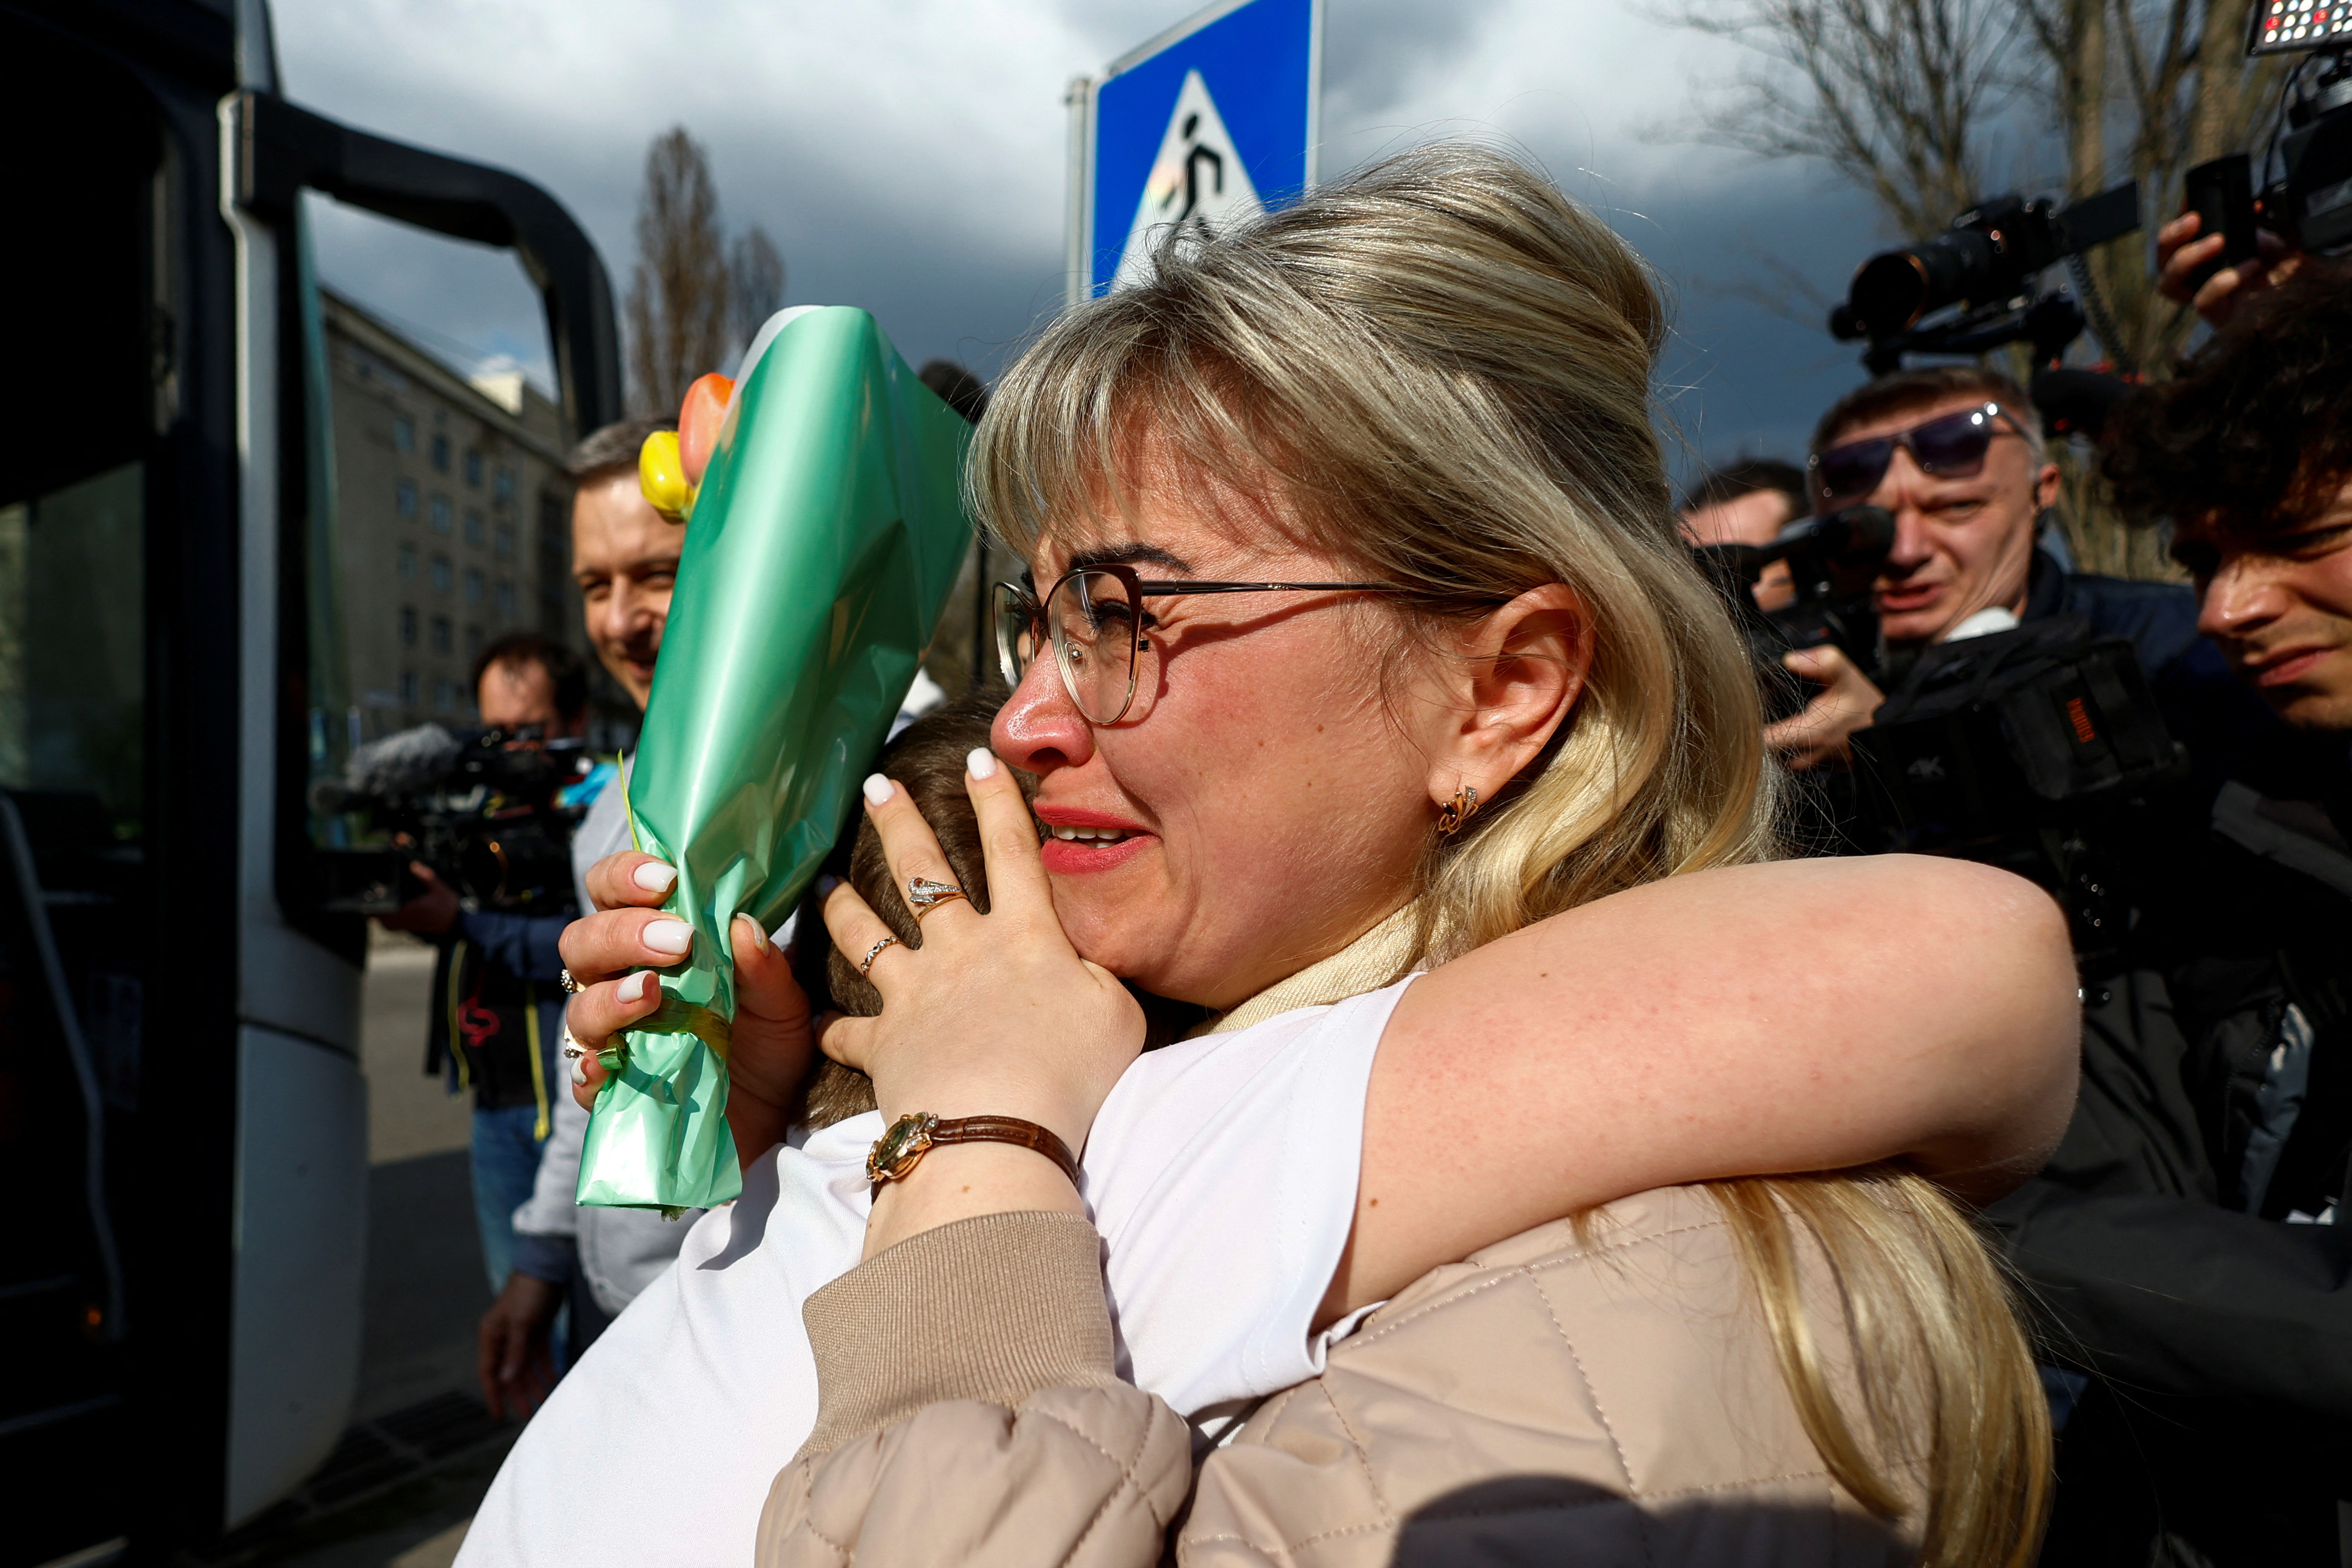 Yana Shapochko reacts as she embraces her 9-year-old nephew Danyil, who was taken to Russia, after he returned via the Ukraine-Belarus border, in Kyiv